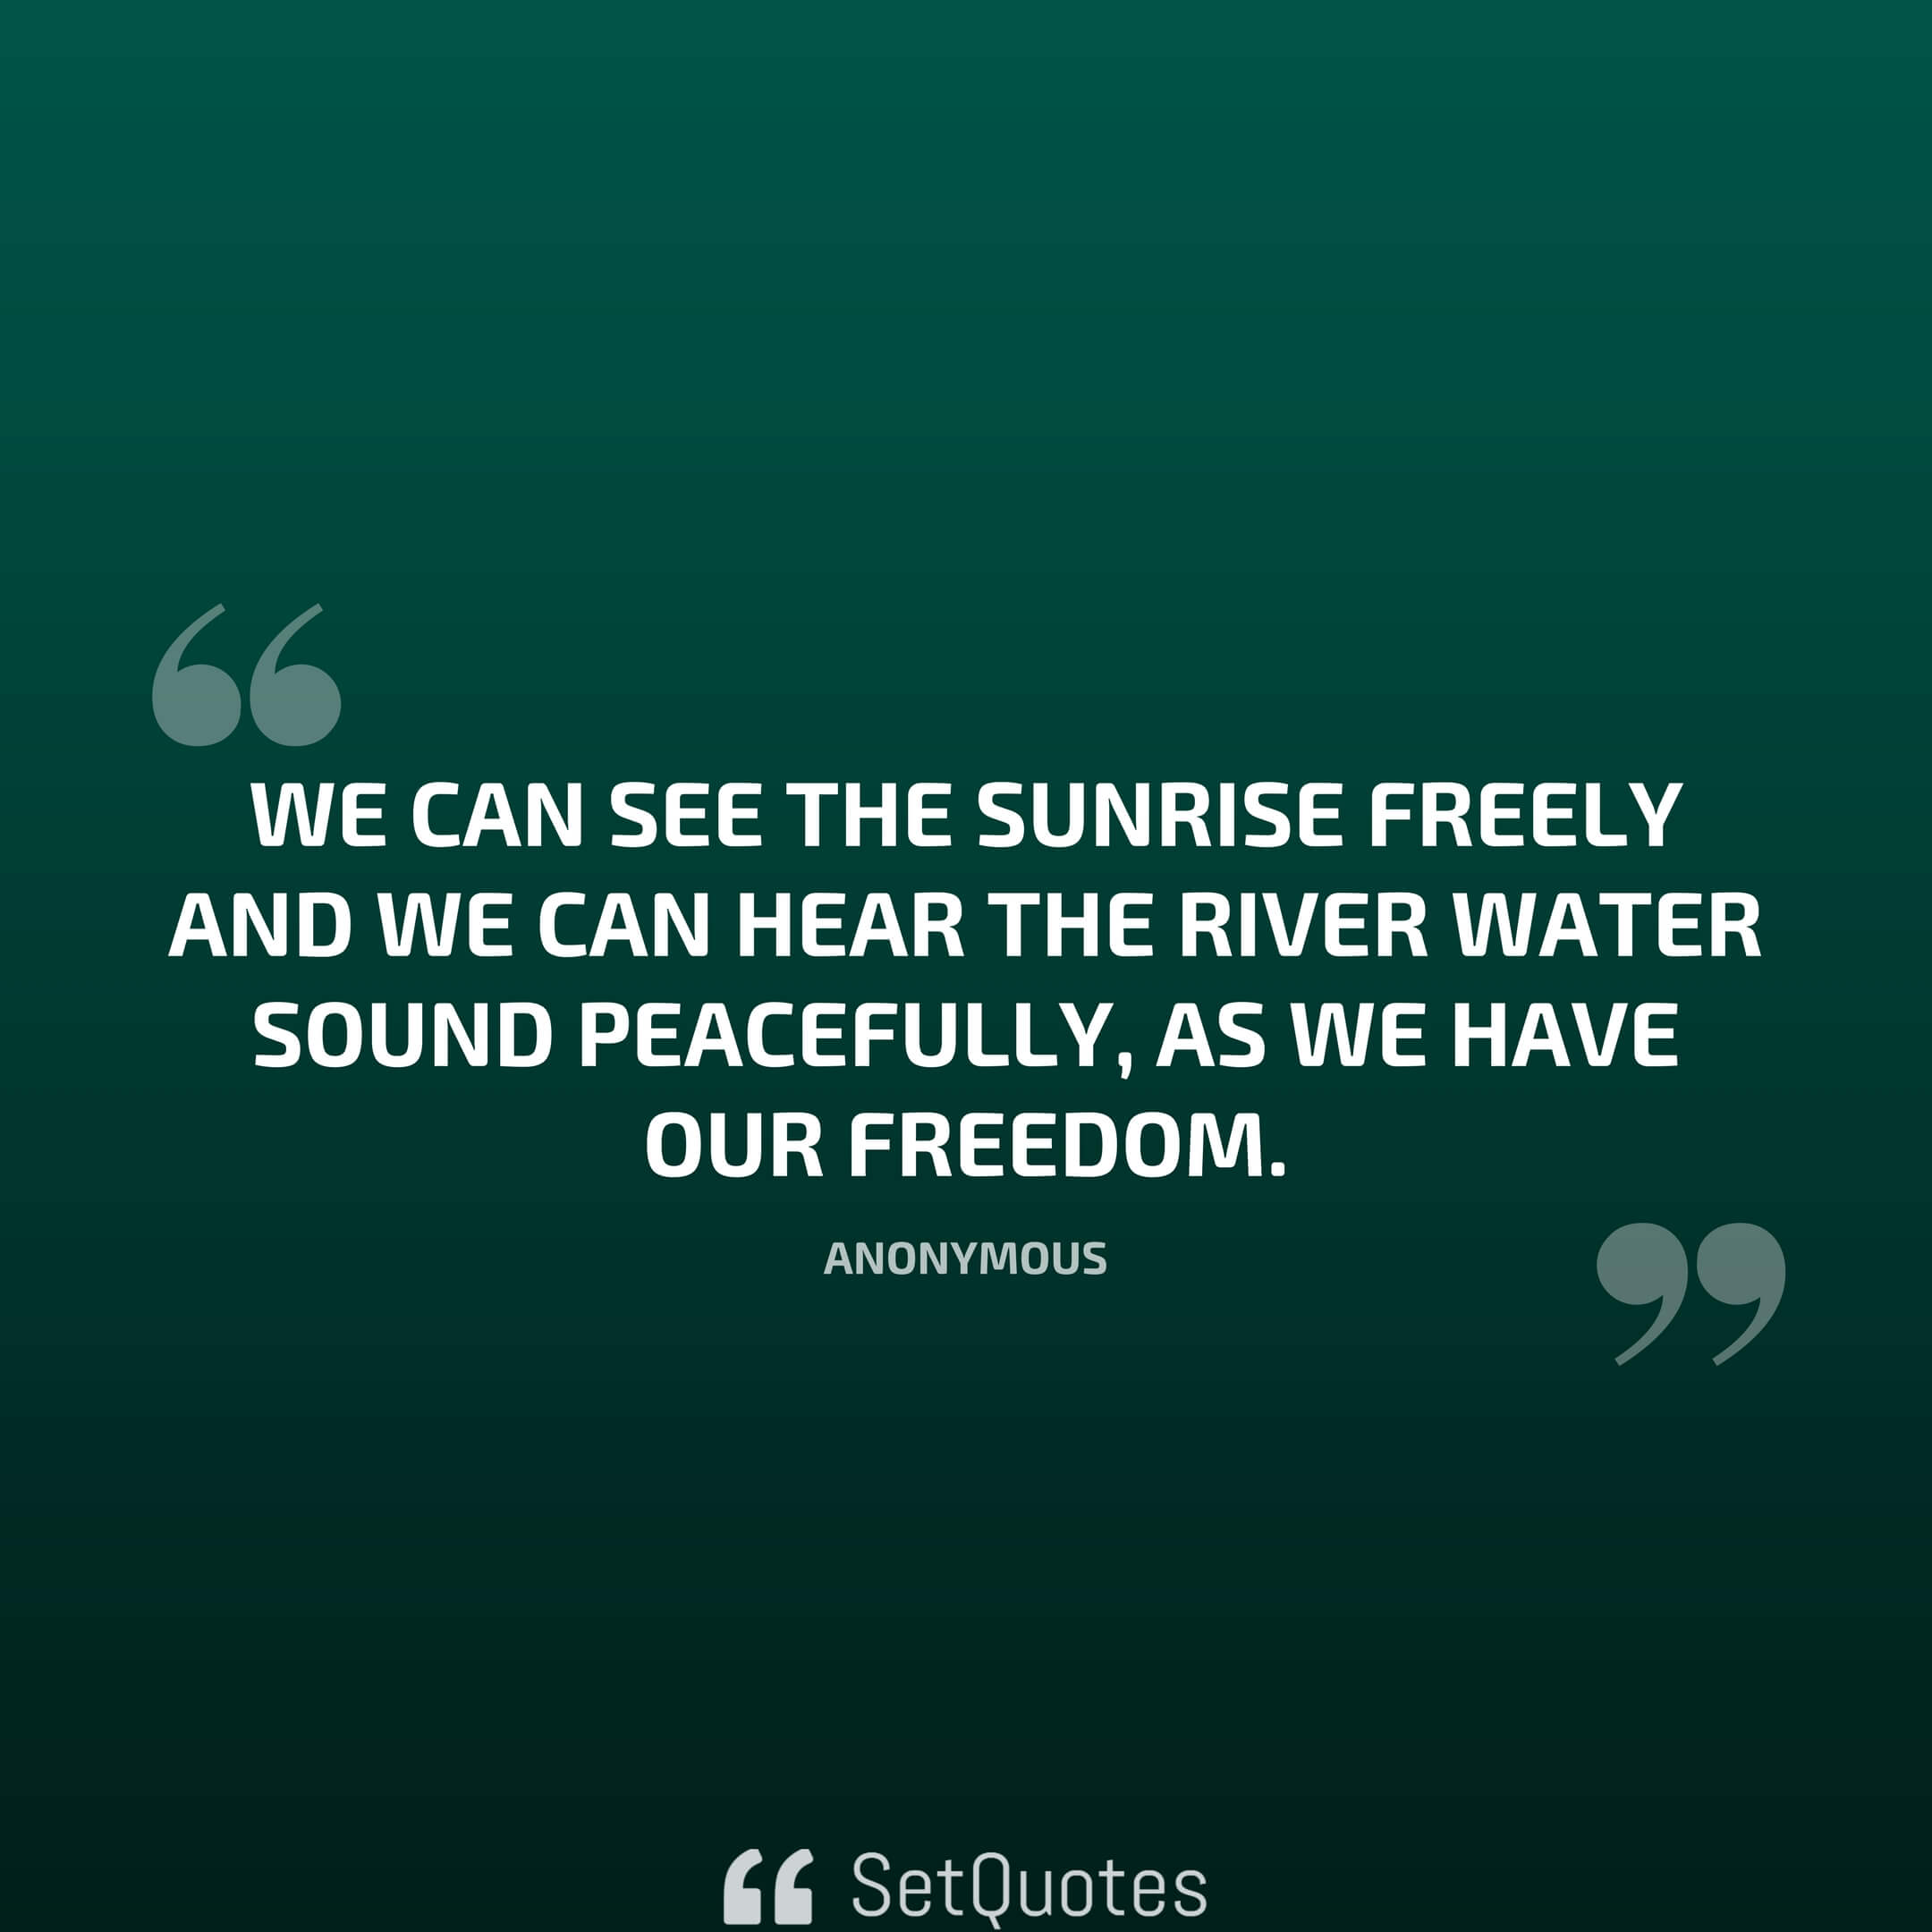 We can see the sunrise freely and we can hear the river water sound peacefully; as we have our freedom.